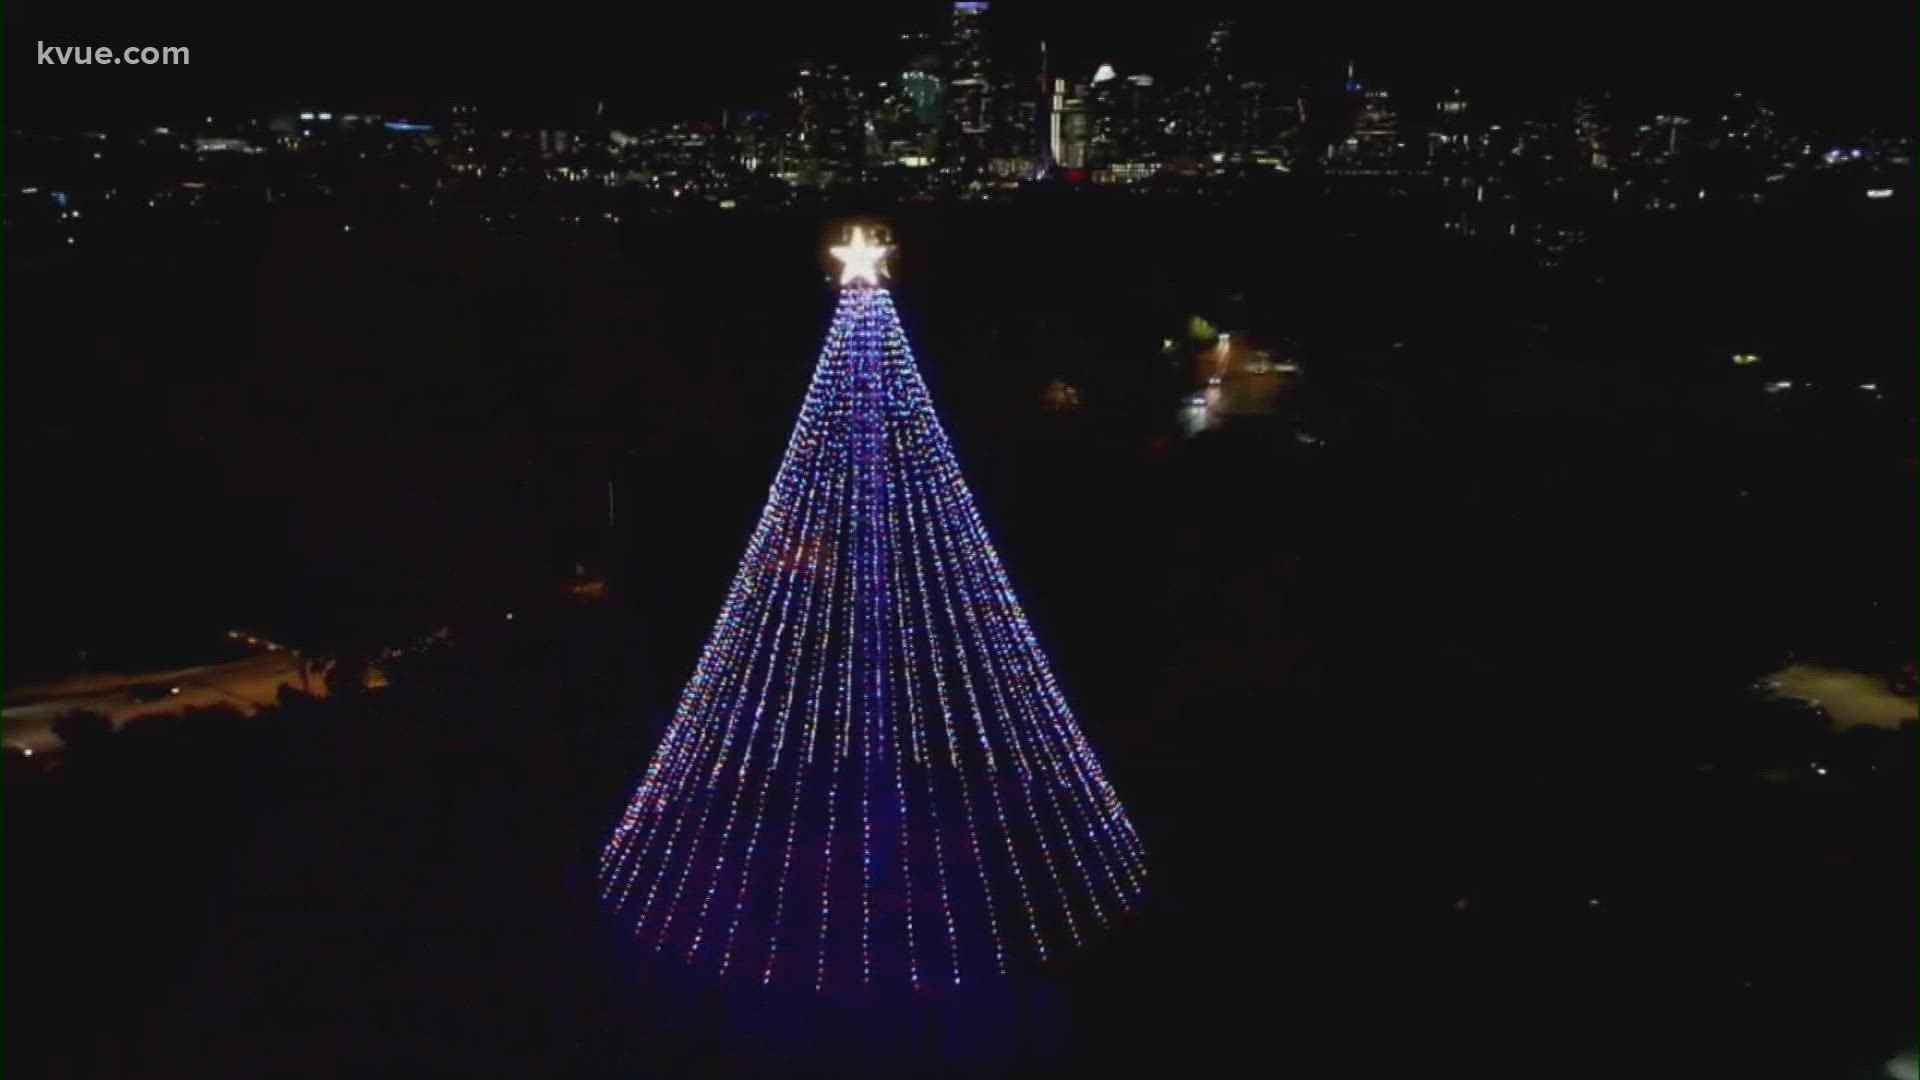 Austin Energy crews will string the 155-foot-tall holiday tree in preparation for the holiday season.